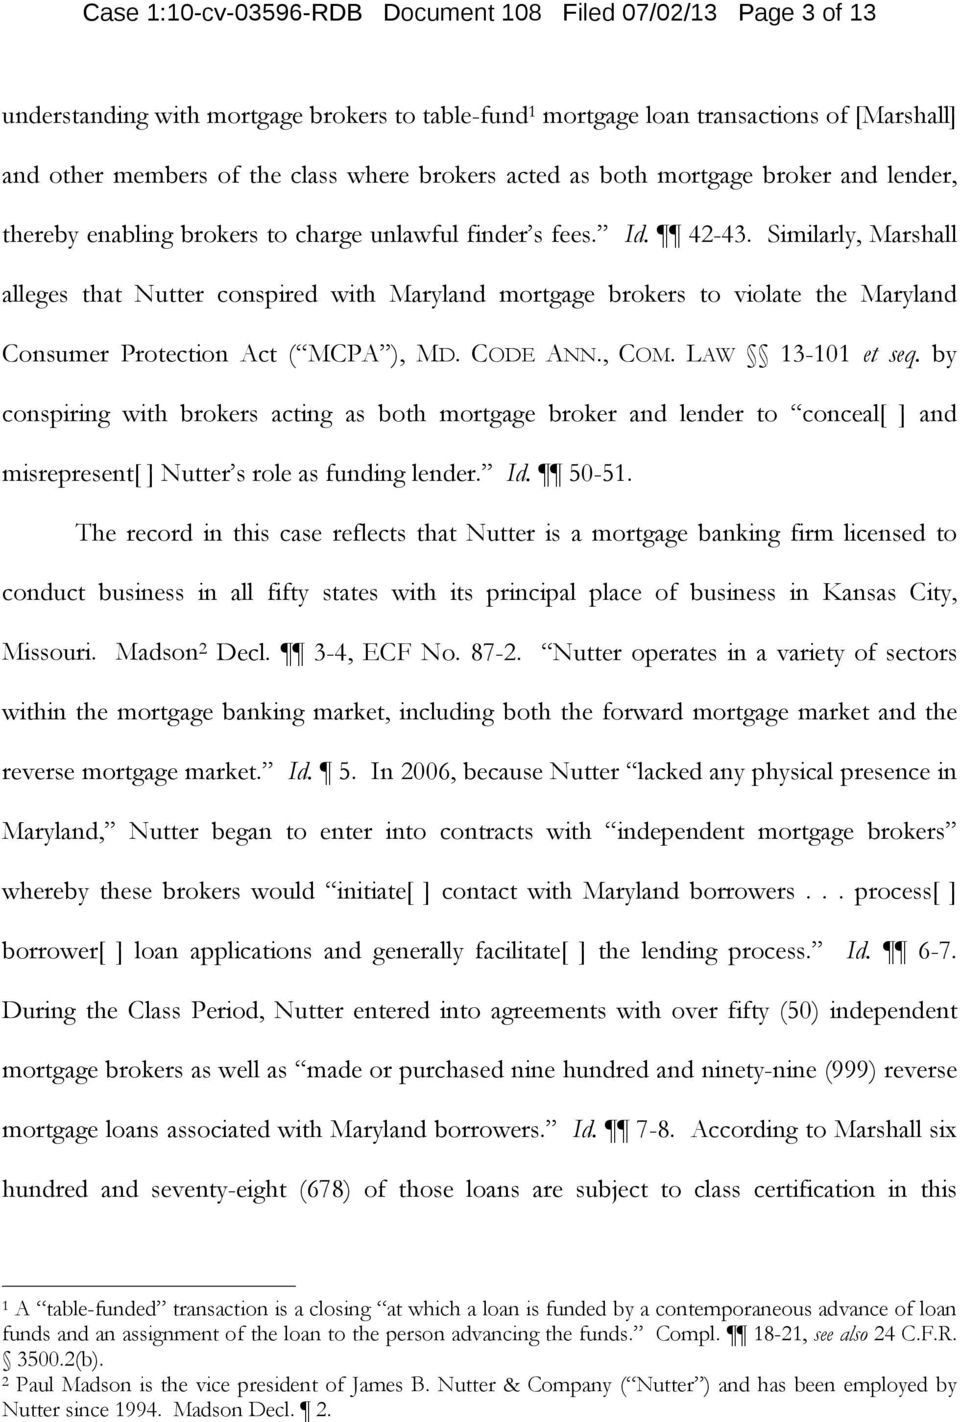 Similarly, Marshall alleges that Nutter conspired with Maryland mortgage brokers to violate the Maryland Consumer Protection Act ( MCPA ), MD. CODE ANN., COM. LAW 13-101 et seq.